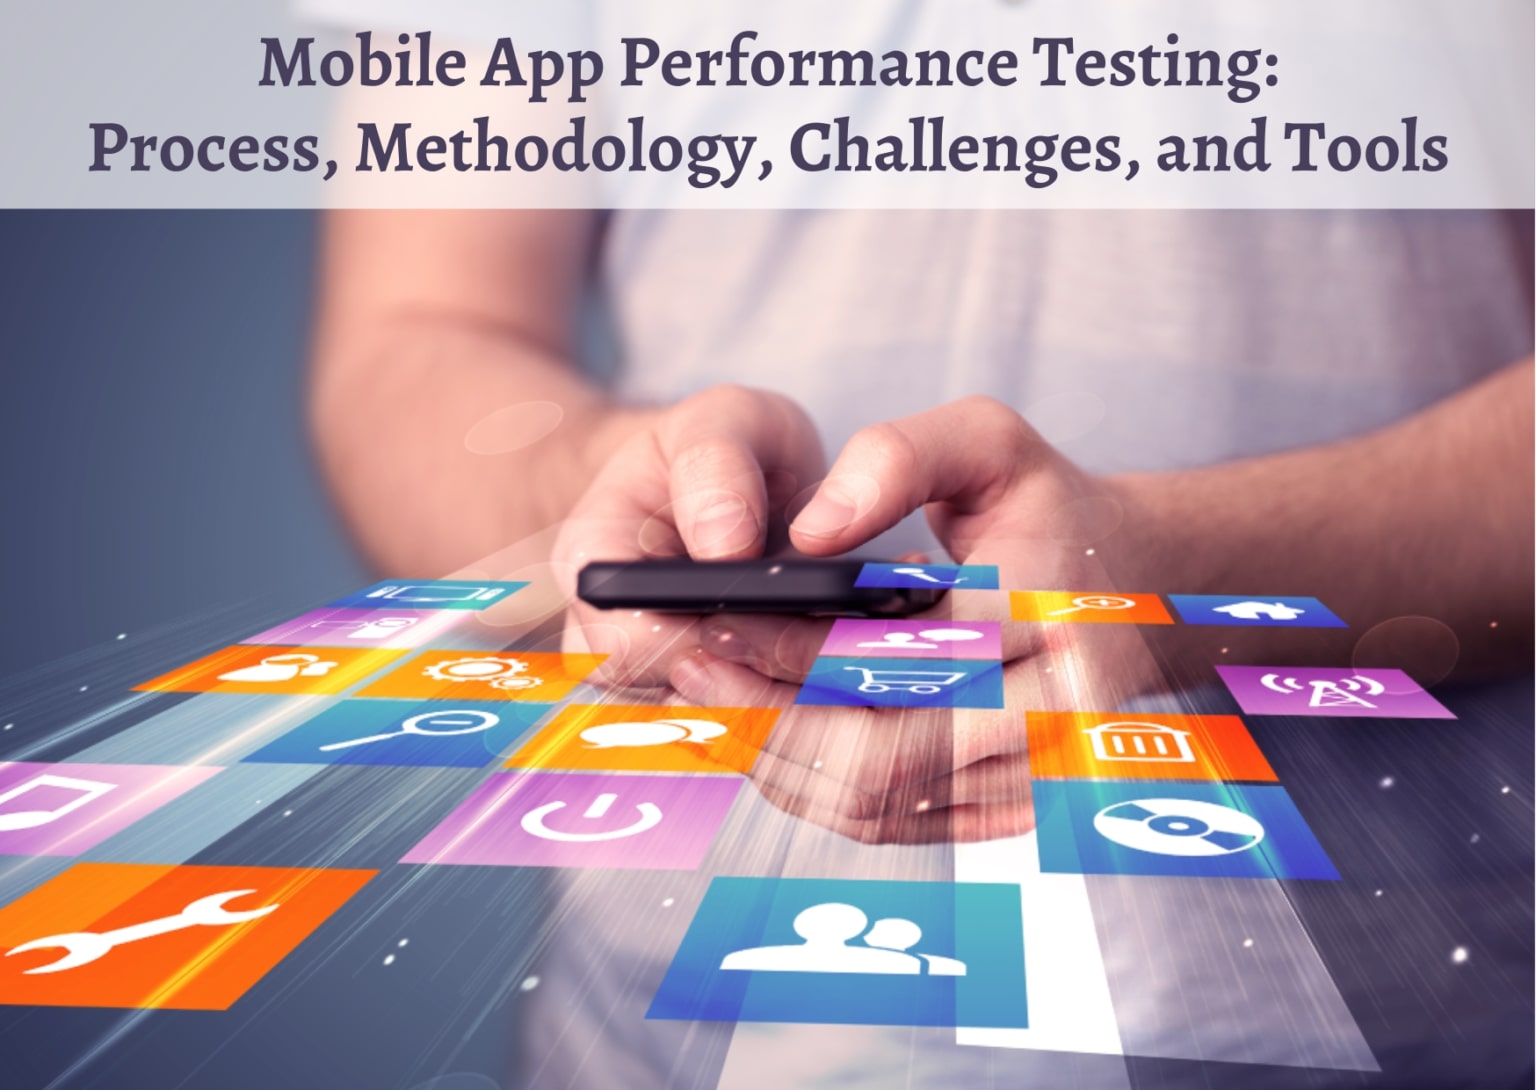 Mobile App Performance Testing: Process, Methodology, Challenges and Tools